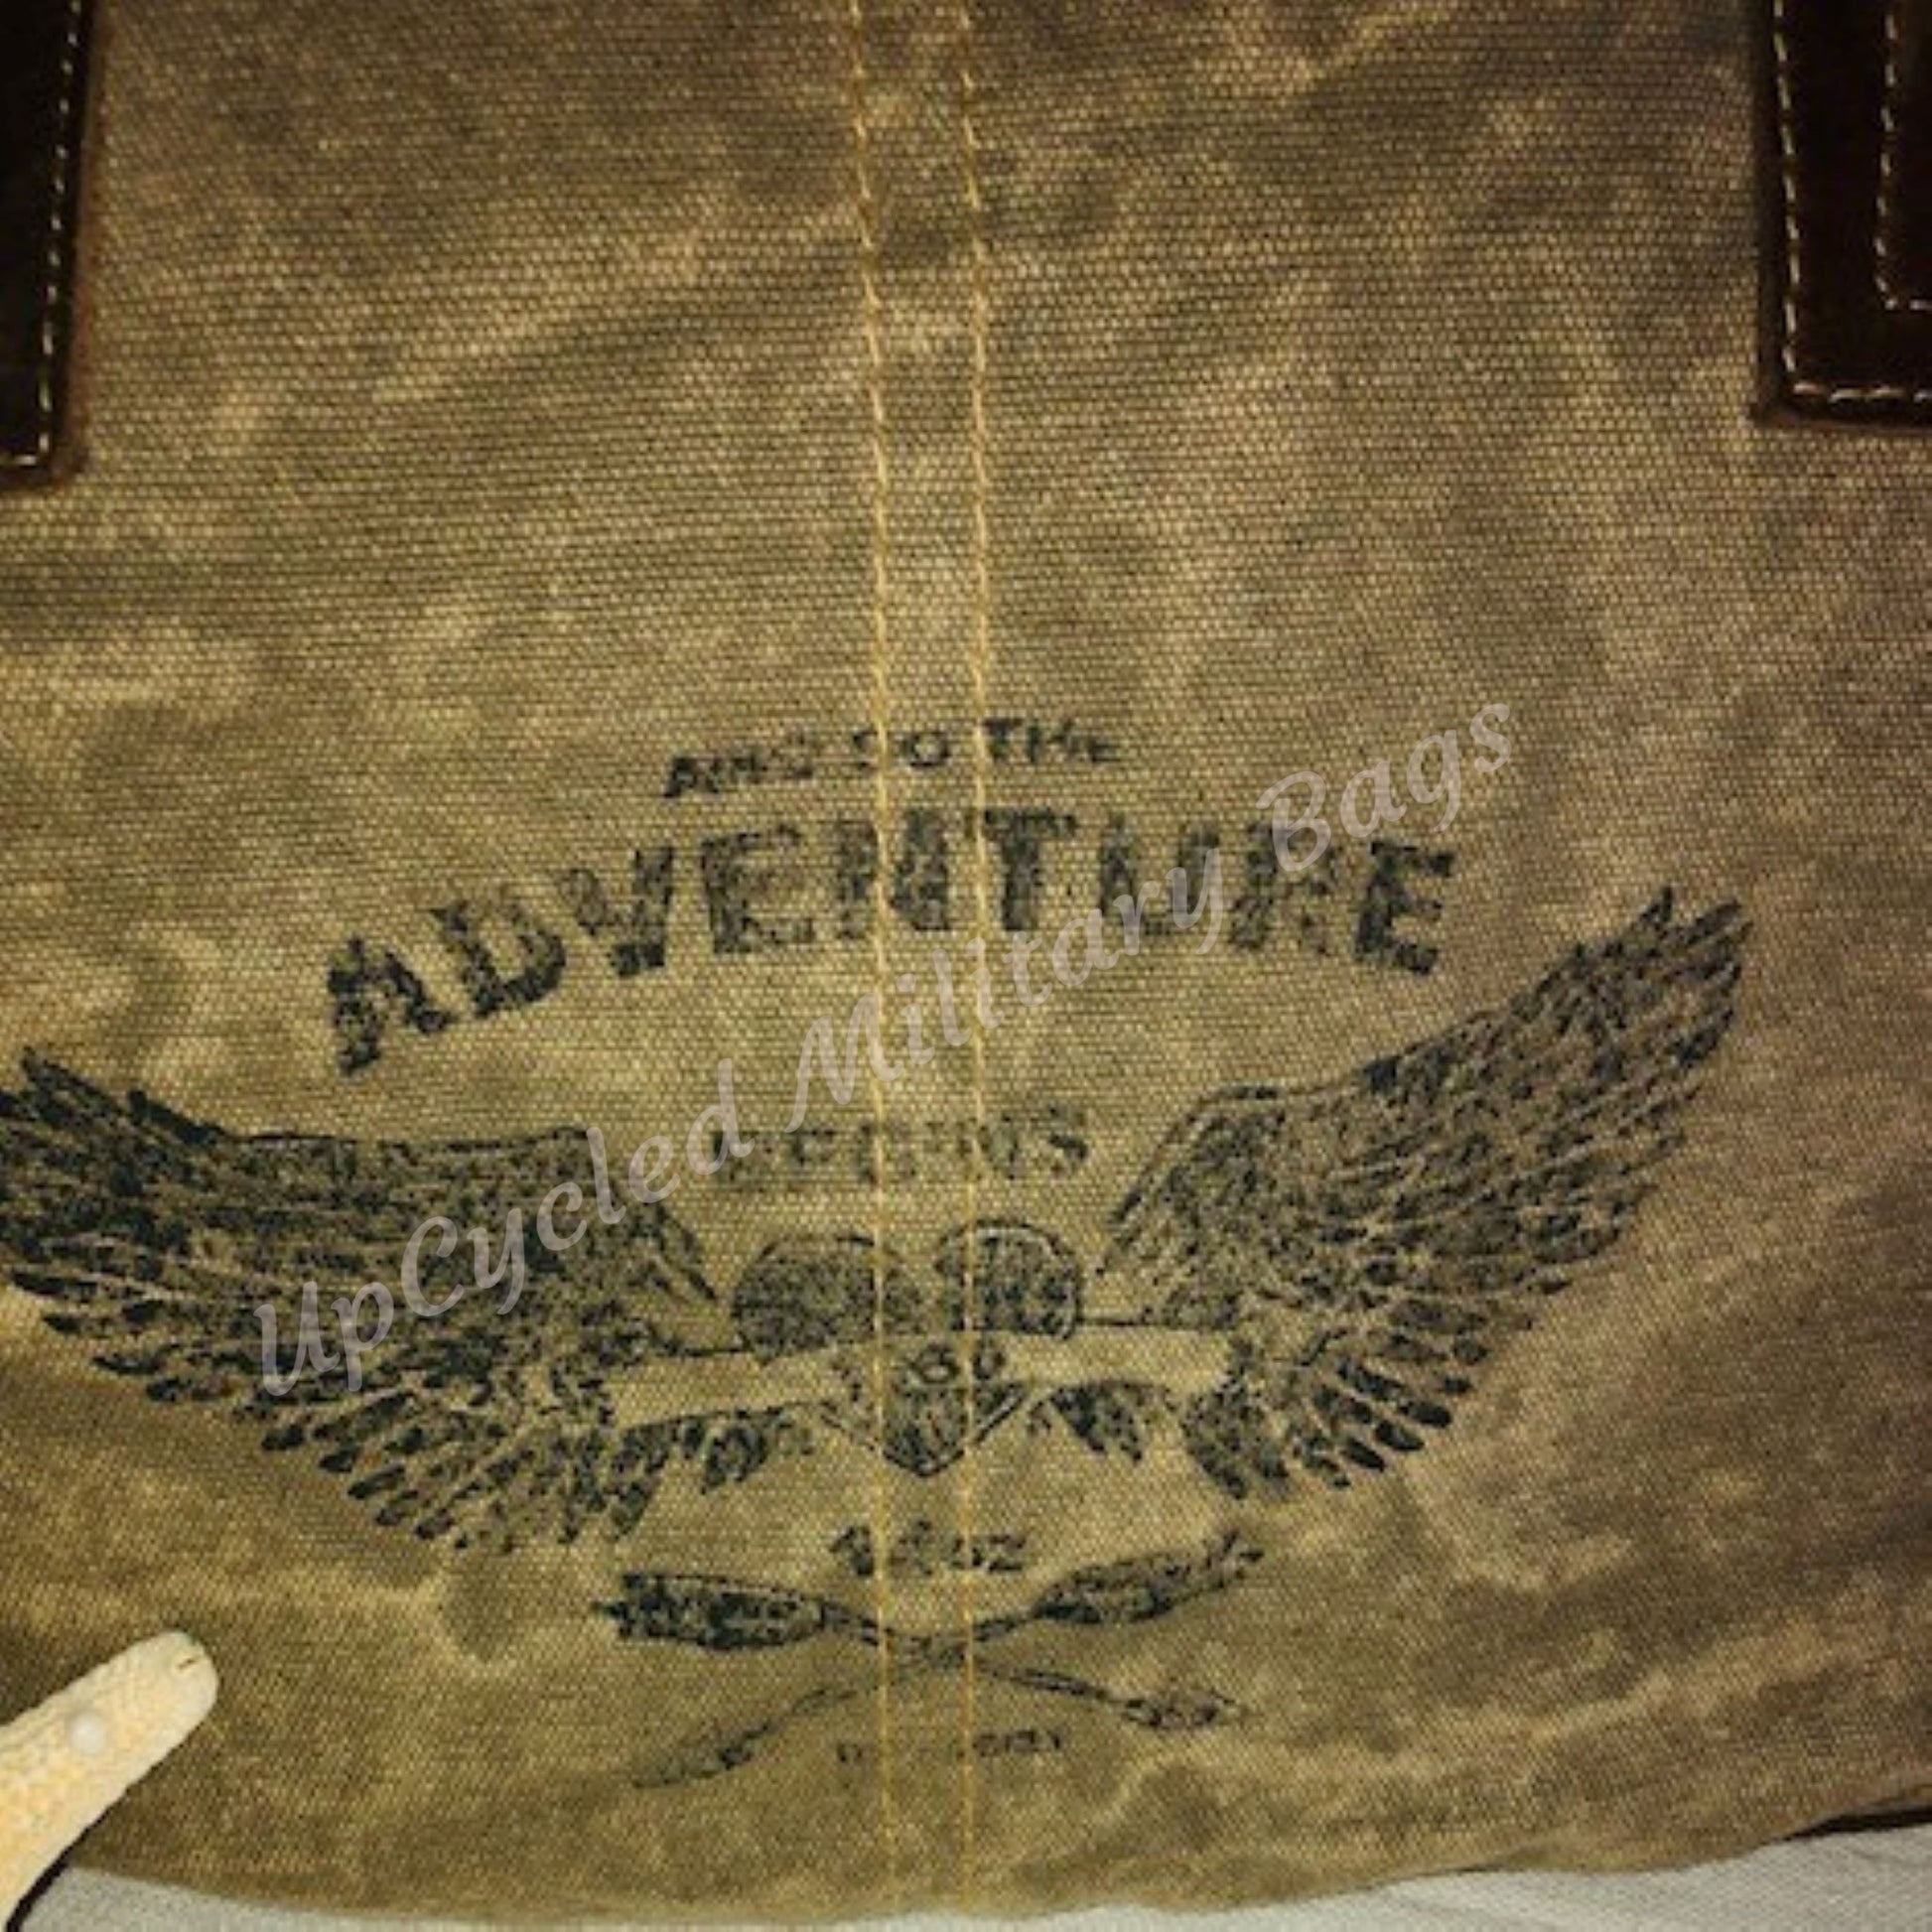 The UpCycled Adventure Tote is made from repurposed military tent and tarp canvas. Along with an image of Angel Wings the bag says: And So the Adventure Begins. This purse is strong and sturdy. It is ready to go on your next adventure but durable enough to make every day an adventure. Perfect Purse / Handbag but also large enough to take as a small travel tote. Dimensions are 13" x 9" x 4". Features: Antique Brass Accents, Top Zippered Closure